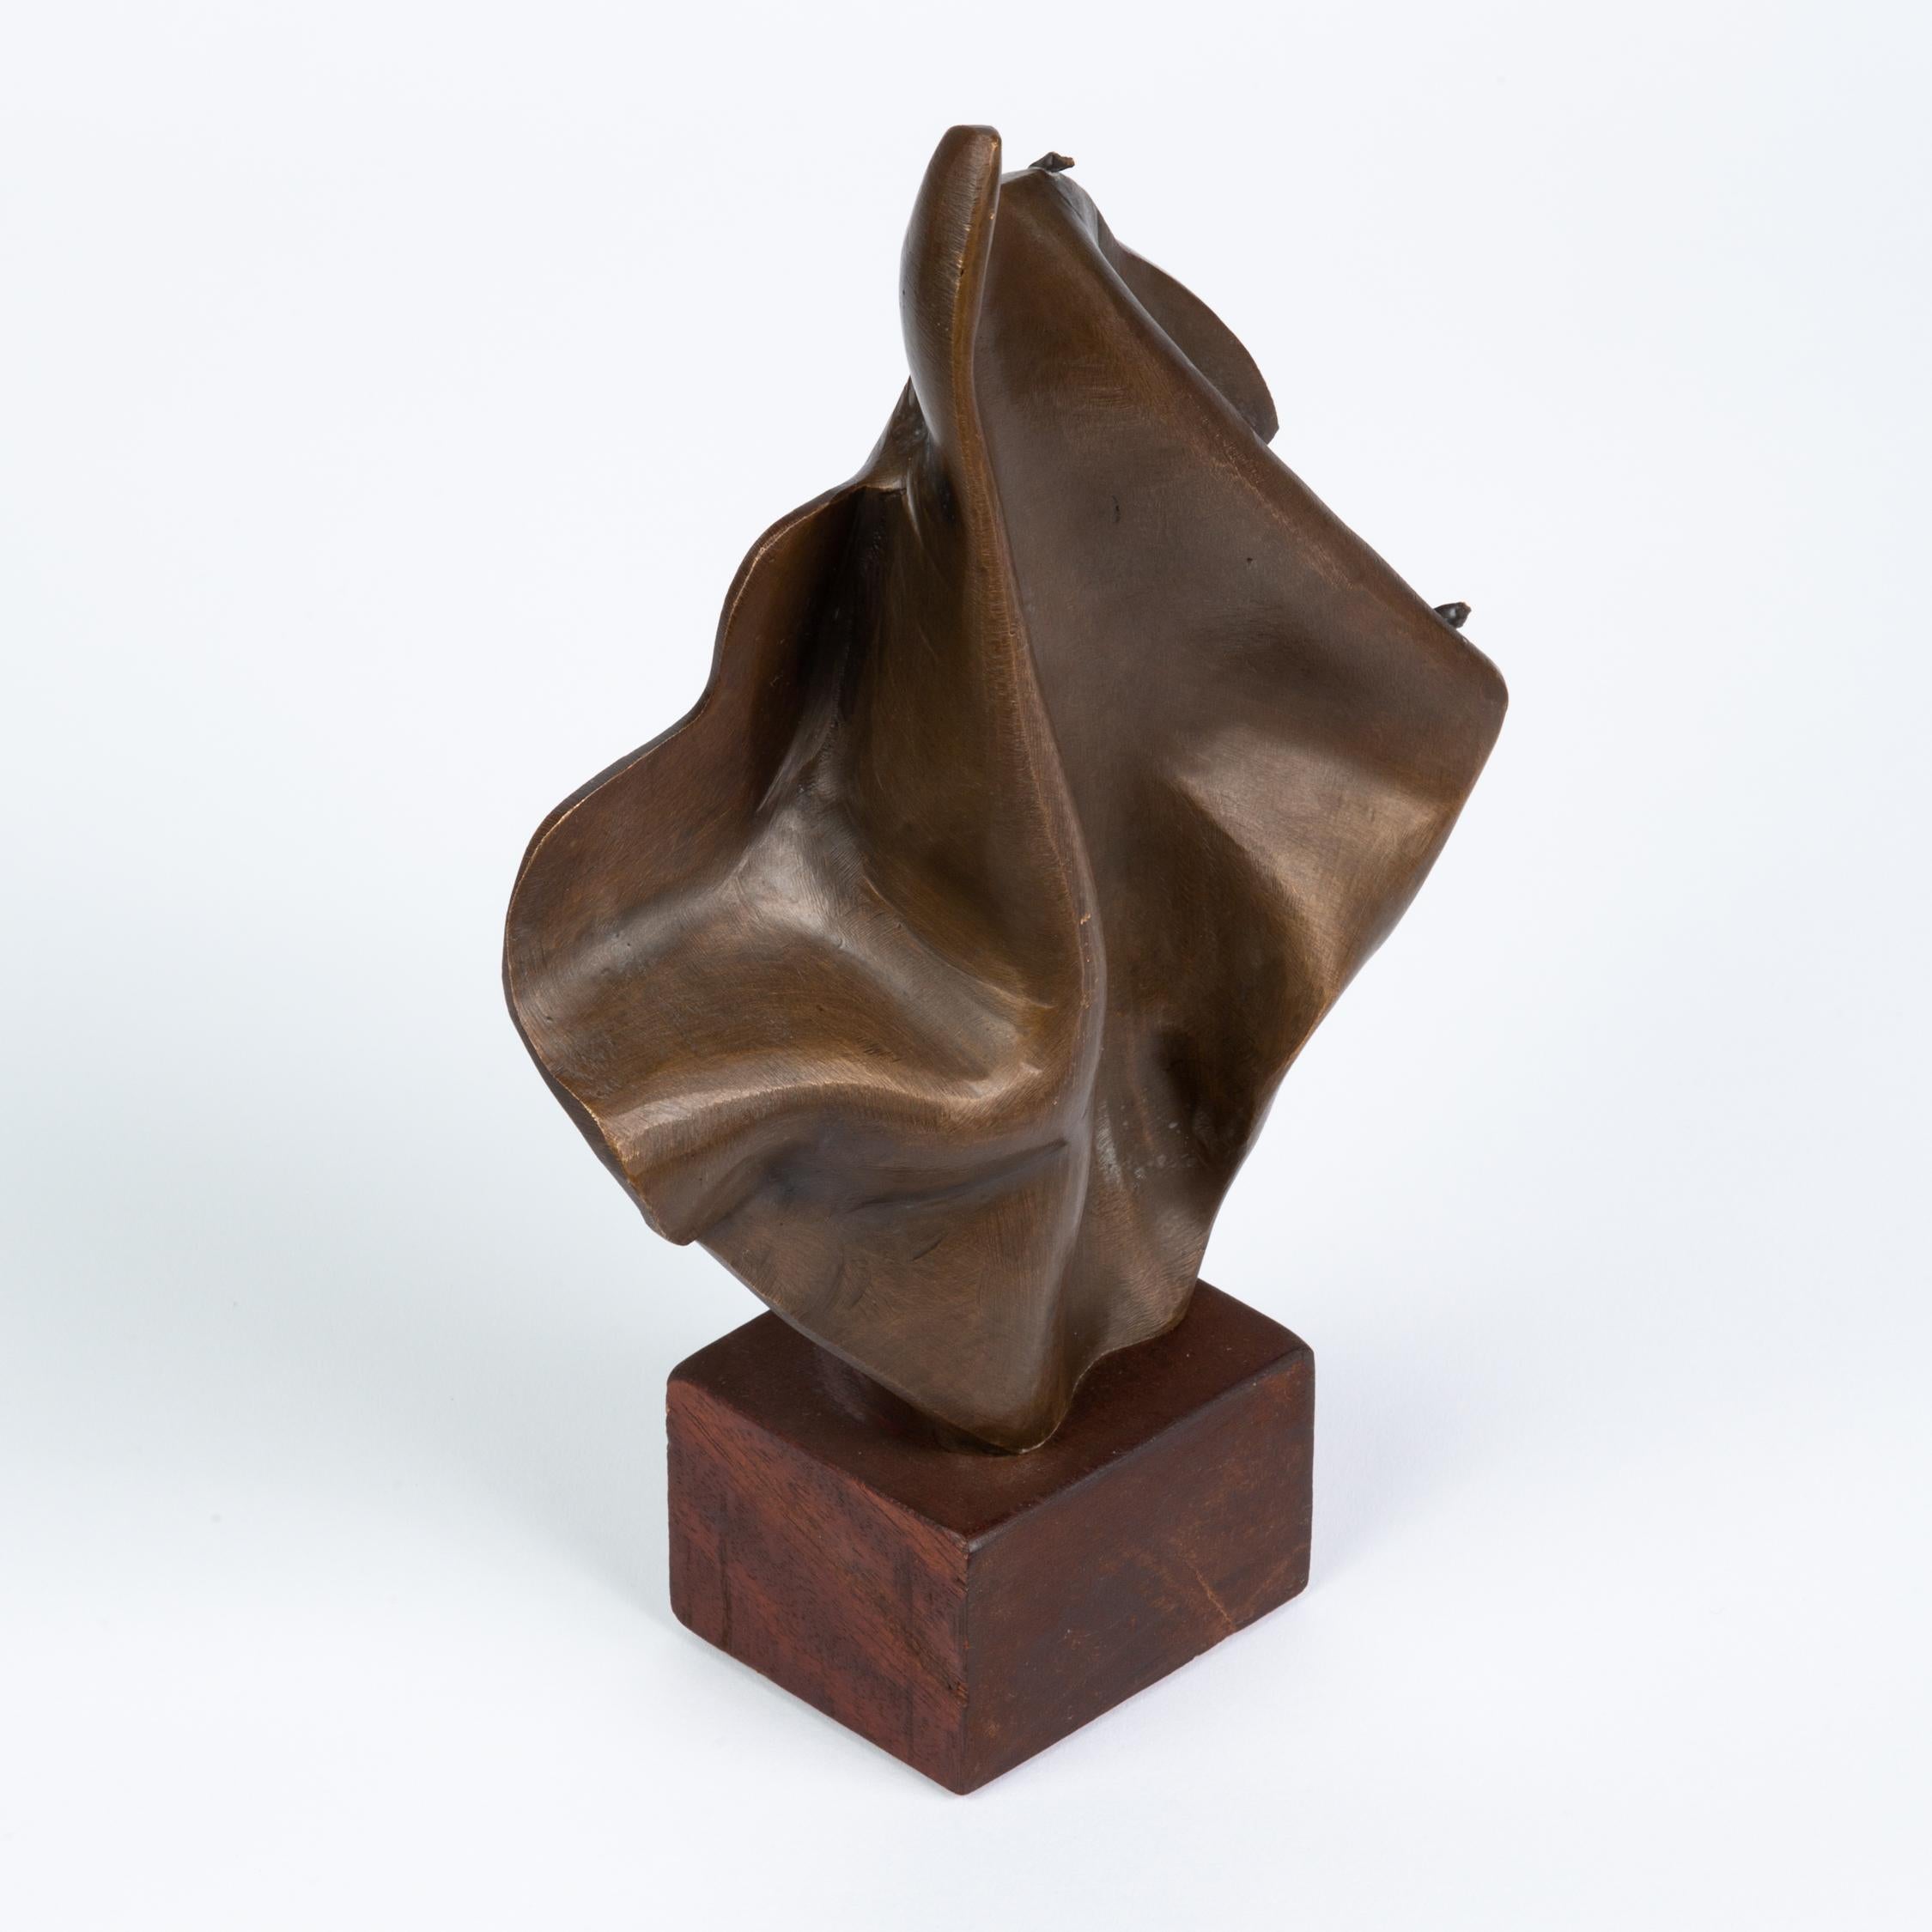 A small, abstract sculpture in cast brass, vaguely mimicking the folds of a draped cloth. The diamond-shaped, upright structure could also be meant to suggest the movement of flames. The bronze is mounted to a stained wood block, creating a